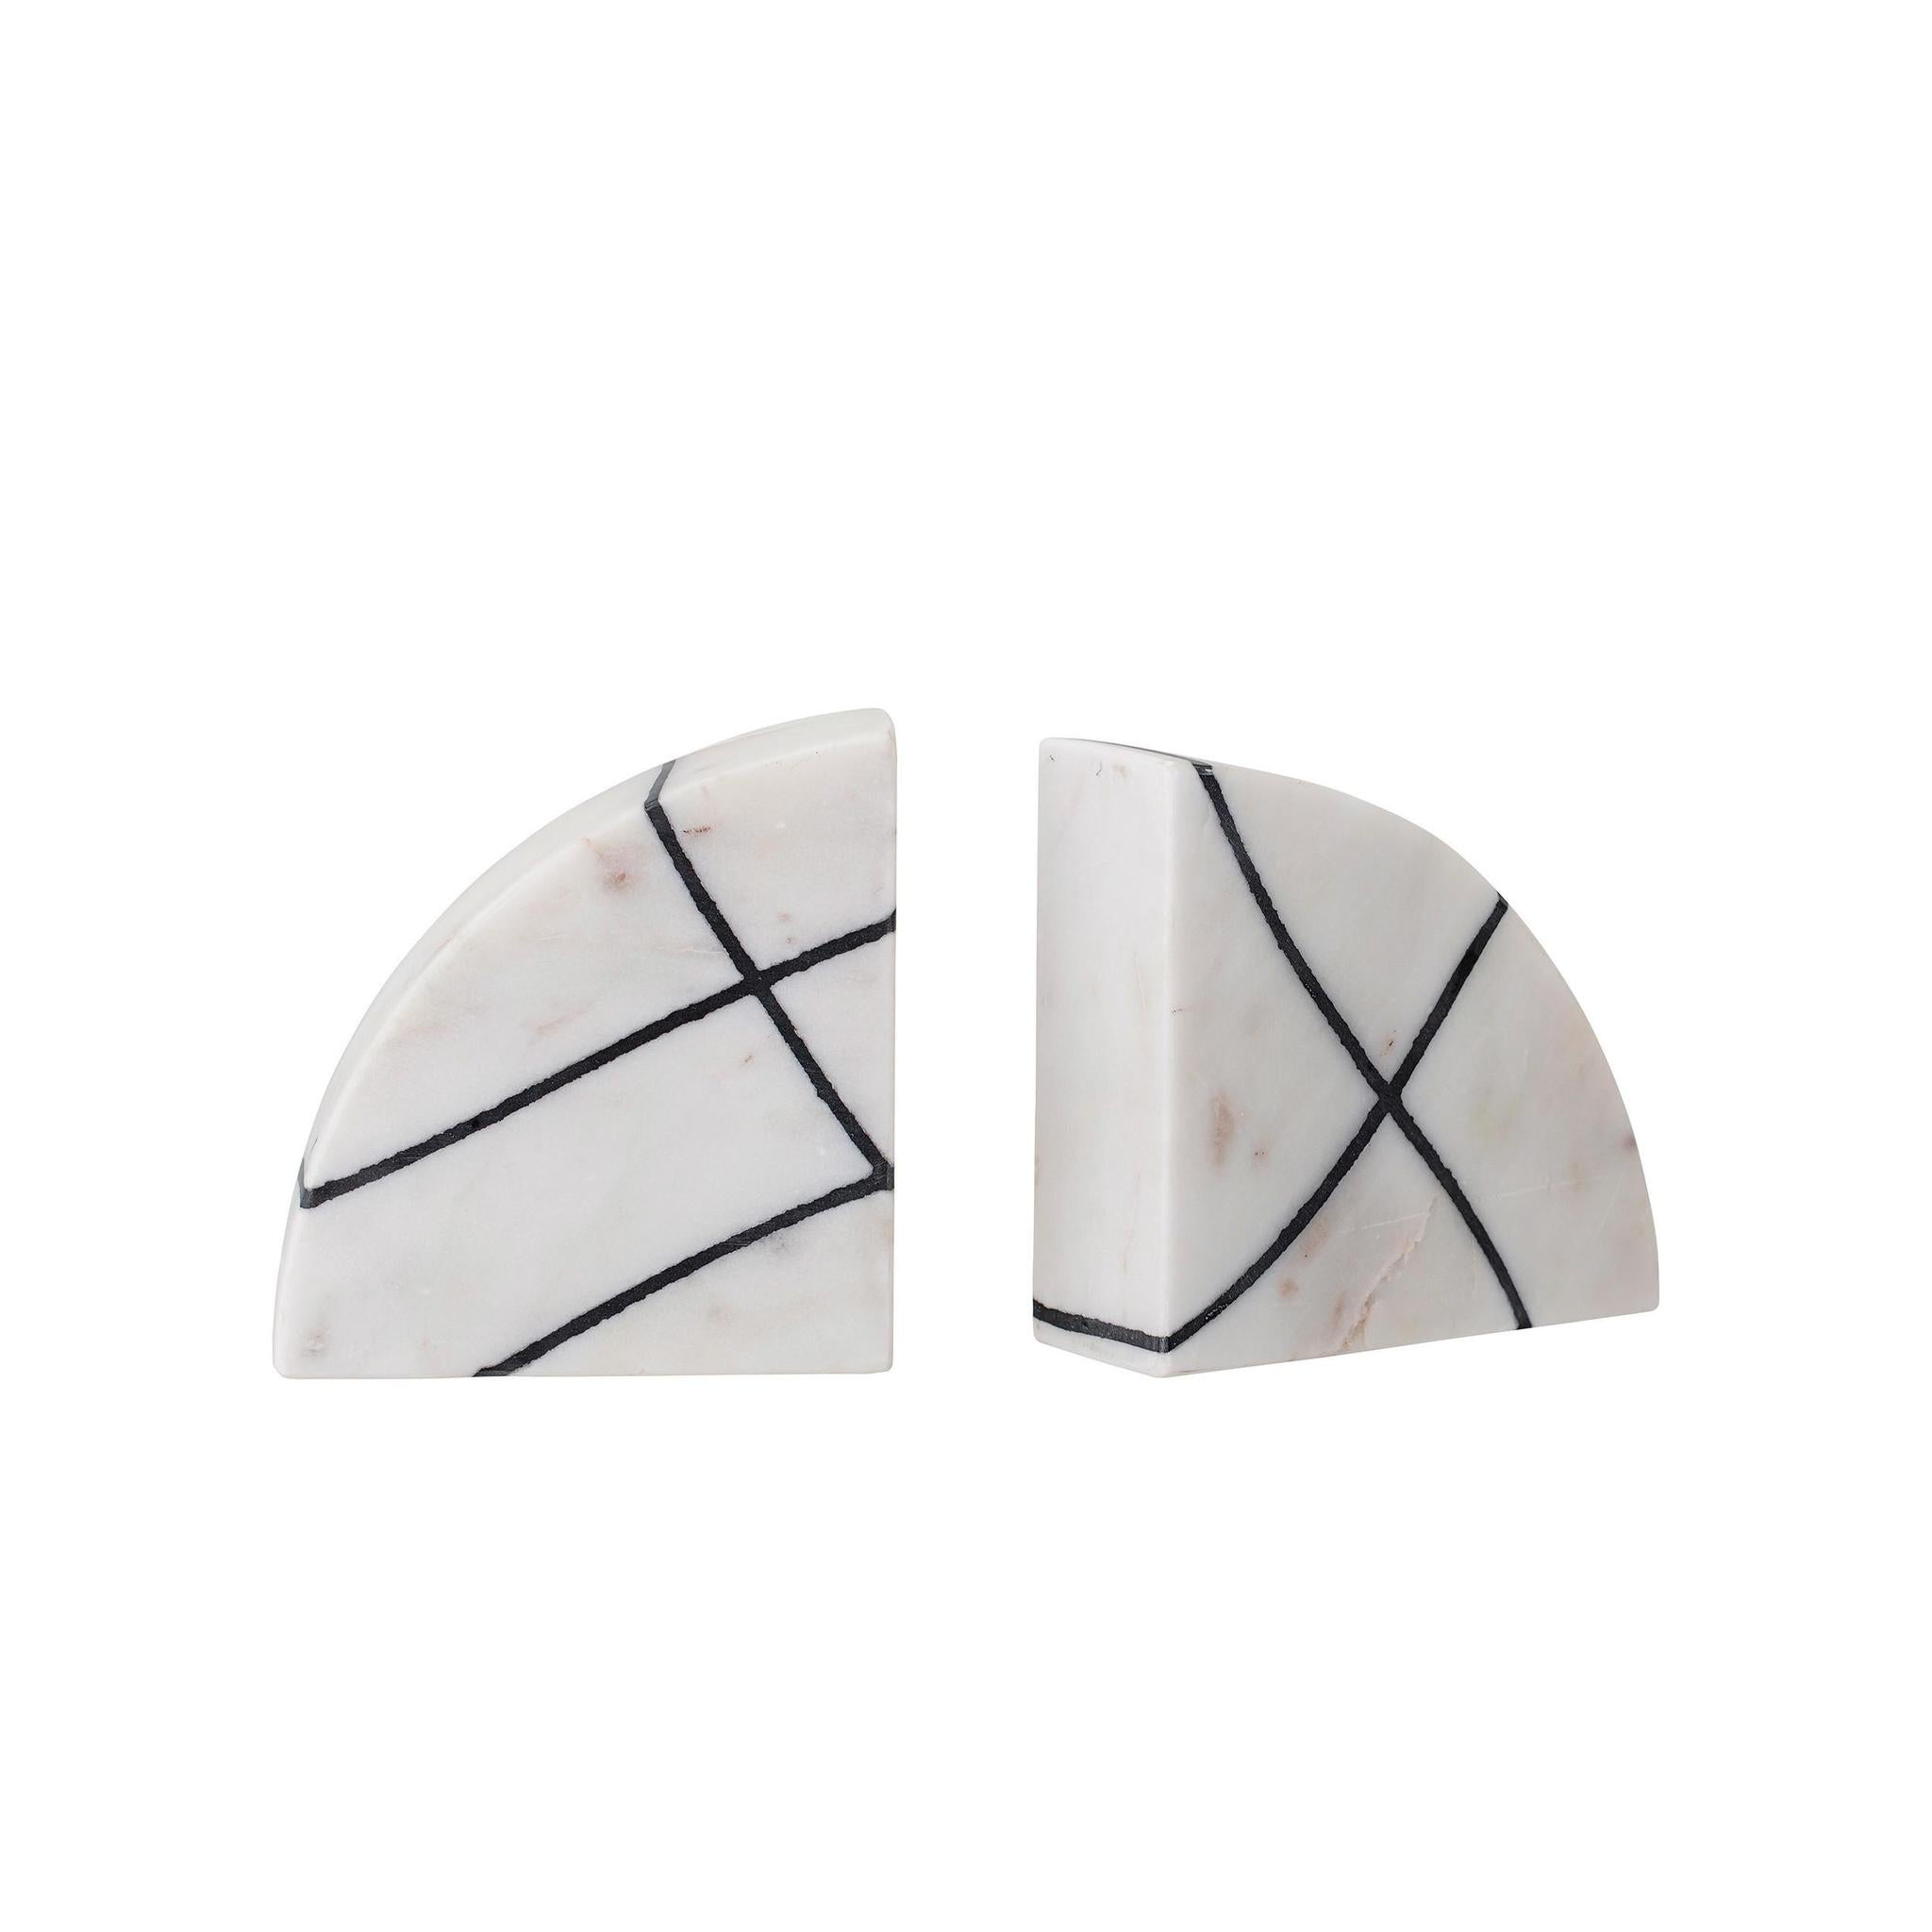 White & Black Geometric Marble Bookends, Set of 2